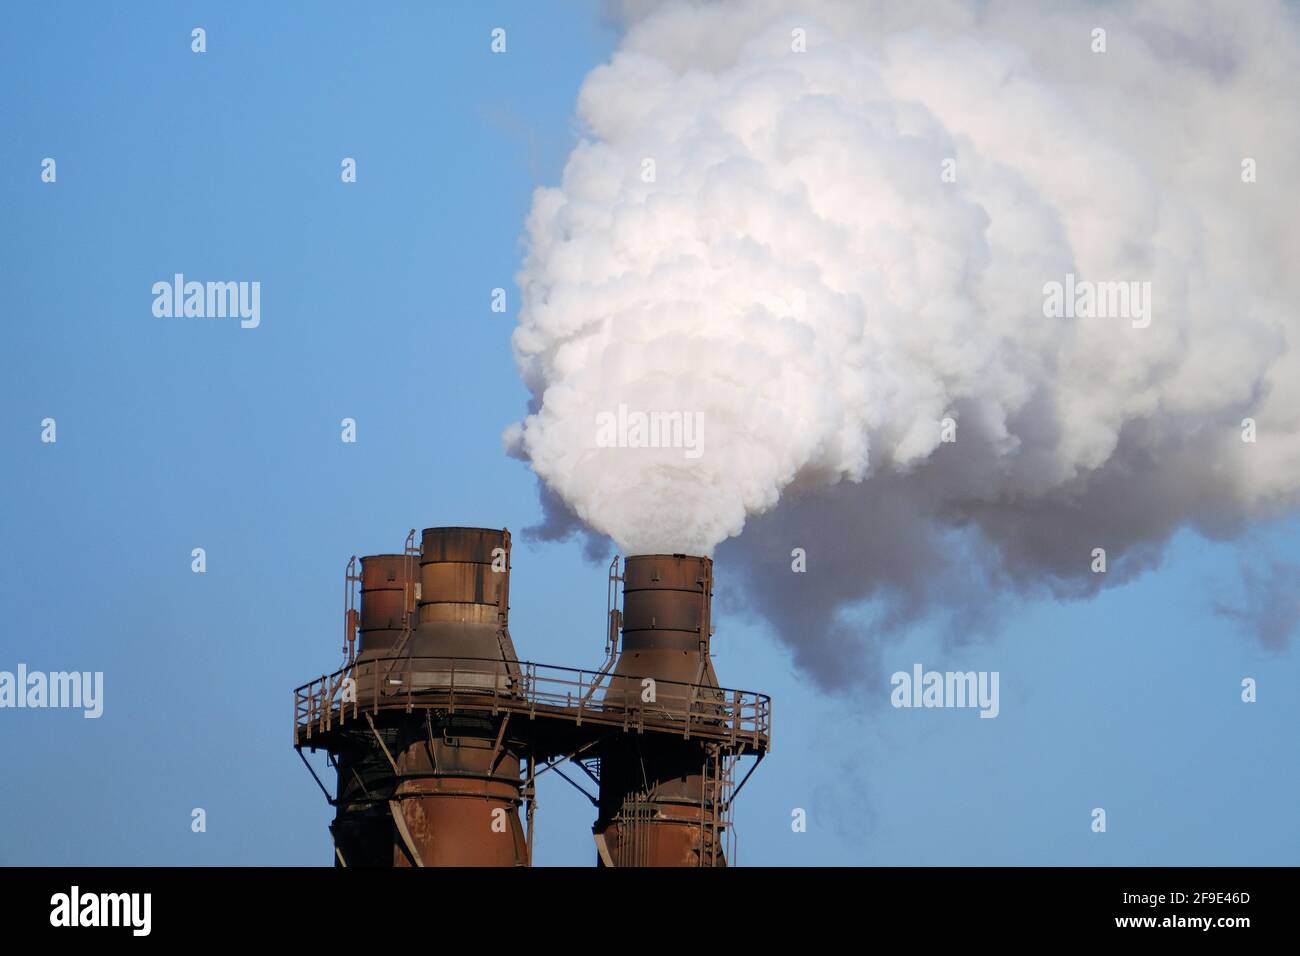 Smoke and steam emitting from steelmaking plant stacks. Stock Photo